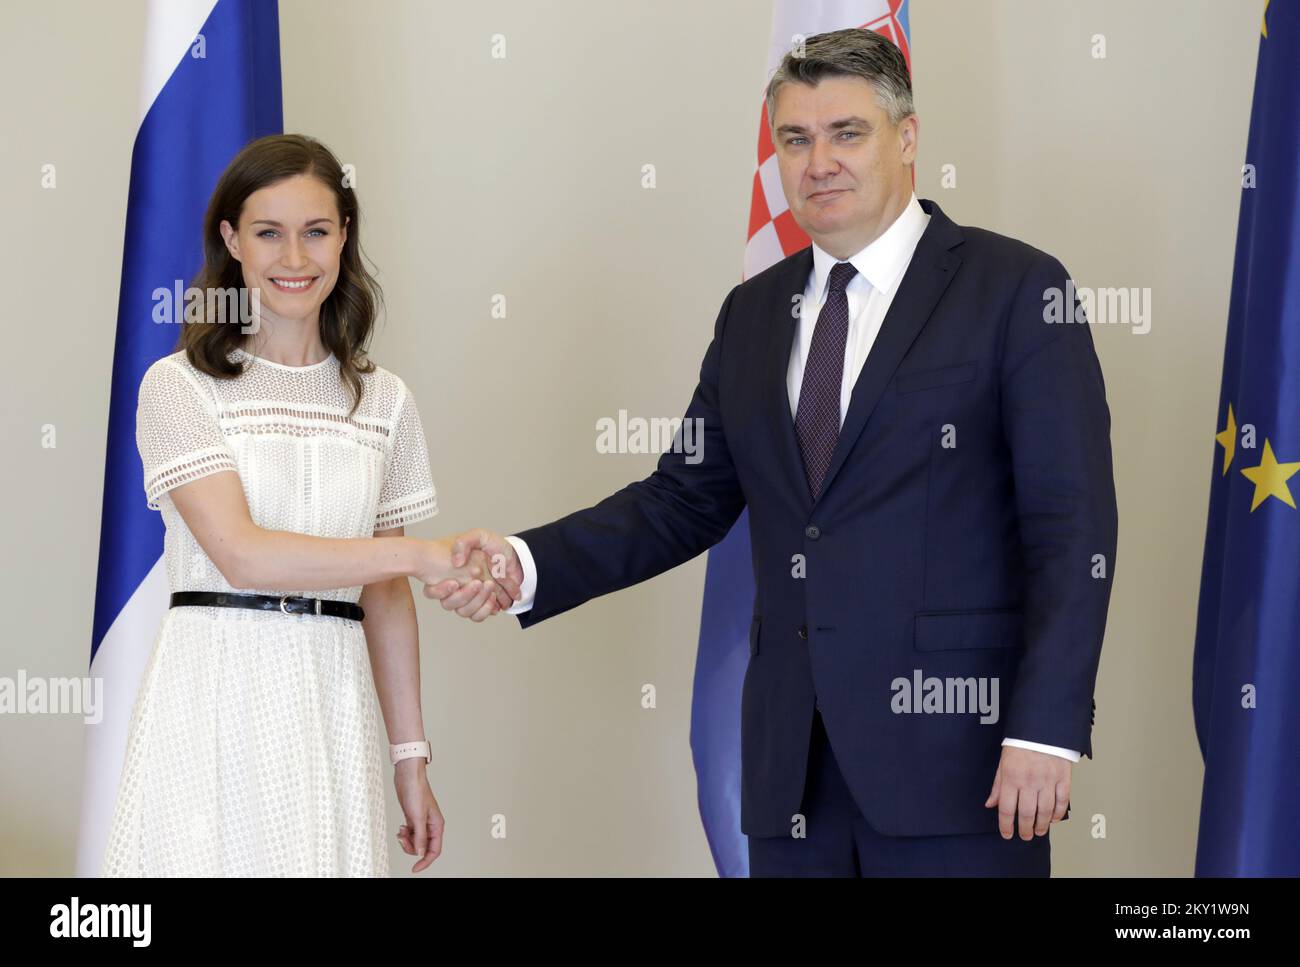 The Finnish Prime Minister and the Croatian President can be seen posing for photographers ahead of a meeting at the President's Office. The Prime Minister of the Republic of Finland Sanna Marin is on an official visit to the Republic of Croatia. She was received by President Zoran Milanovic in his office at Pantovcak, in Zagreb, Croatia, on June 21 2022. Photo: Jurica Galoic/PIXSELL Stock Photo